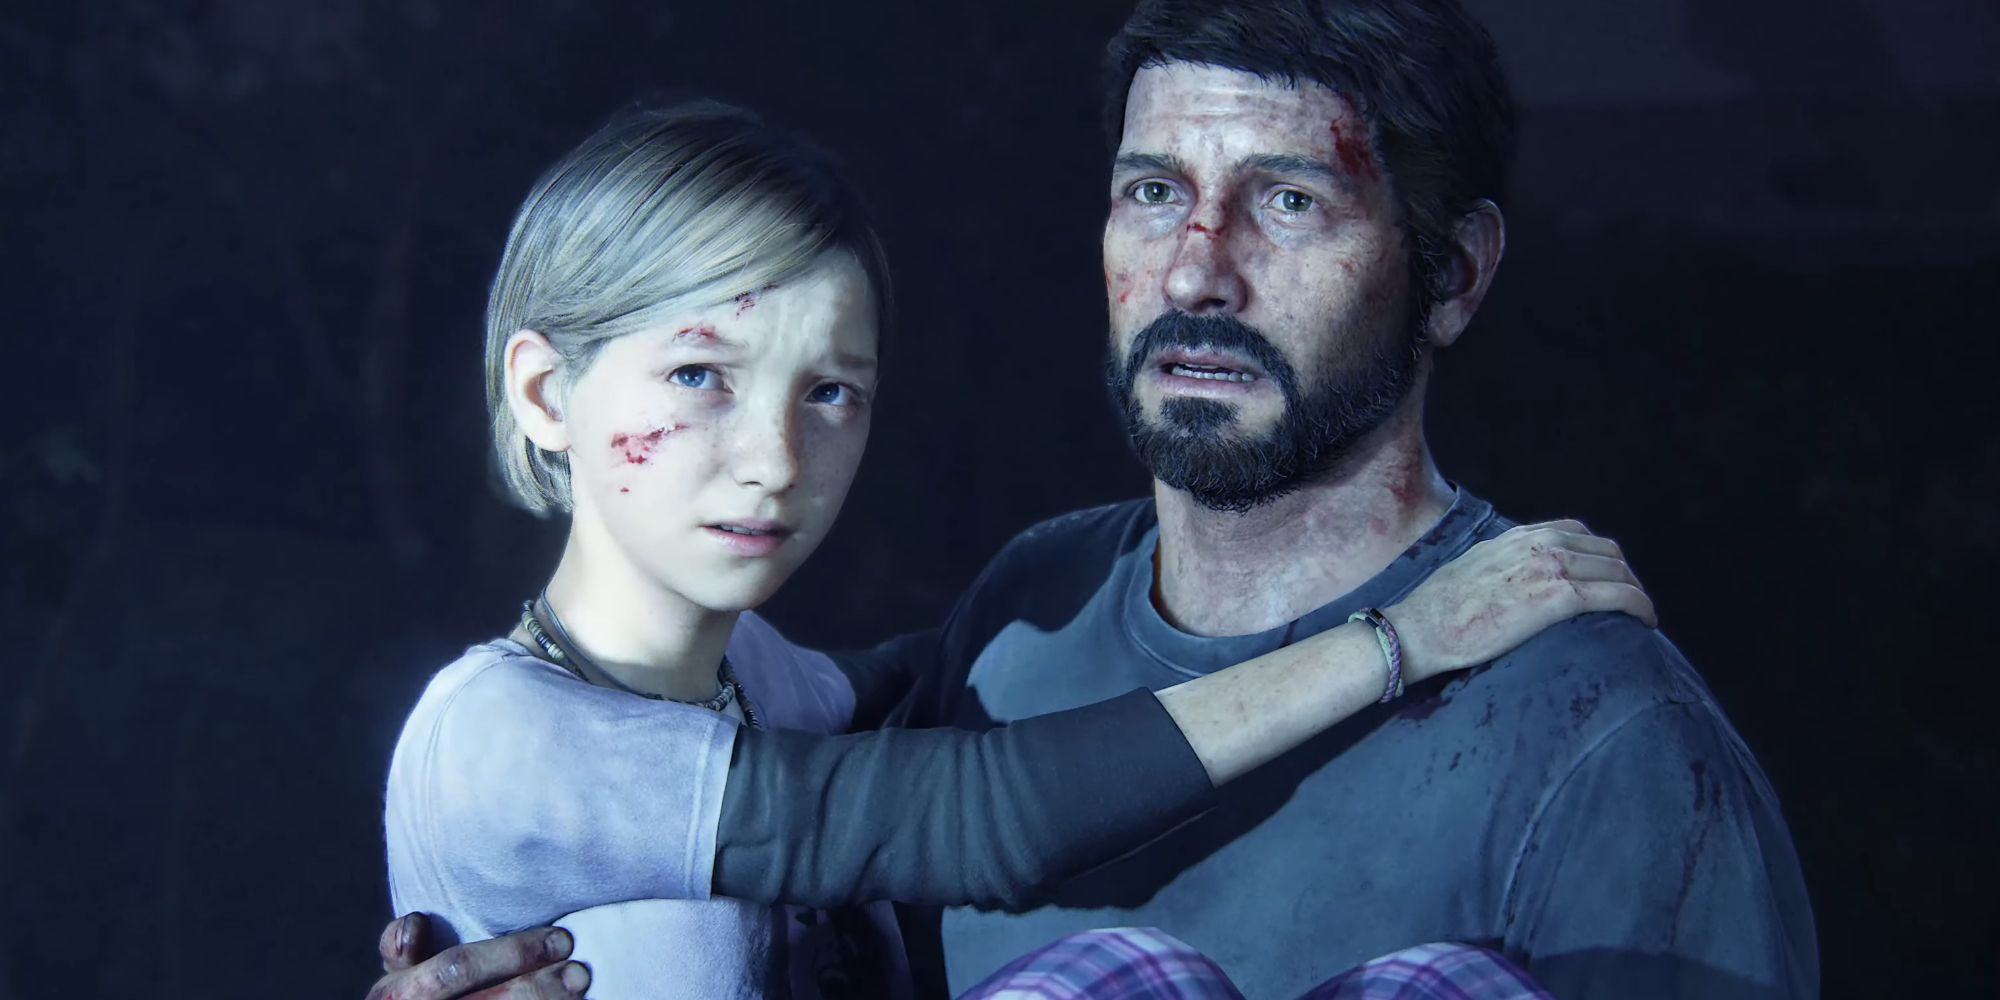 Joel holding Sarah at the beginning of The Last of Us, both being illuminated by a flashlight being held by a soldier off-screen.